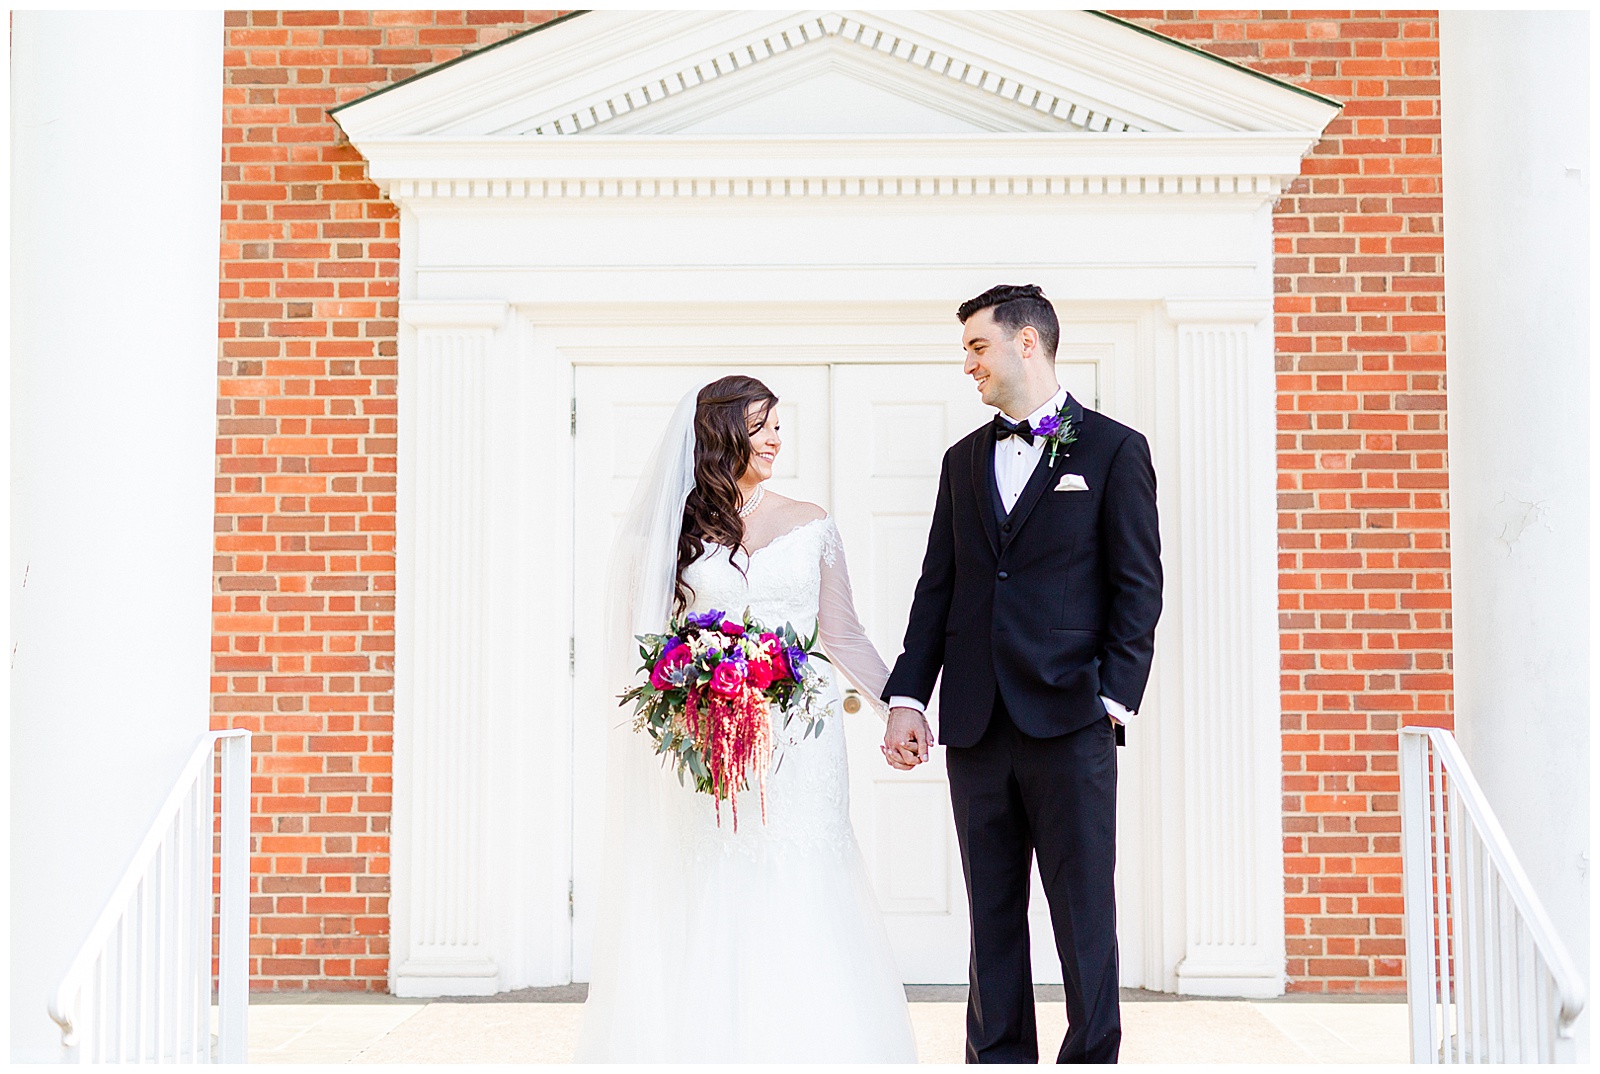 💍 bride groom outdoor portrait after church wedding 👰 Bride: lace wedding dress with rhinestone belt rhinestone barrette in hair down with pearls 🤵 Groom: black tux tuxedo and purple flower boutonnière 💍 Bright Colorful Summer City Wedding in Charlotte, NC with Taryn and Ryan | Kevyn Dixon Photography